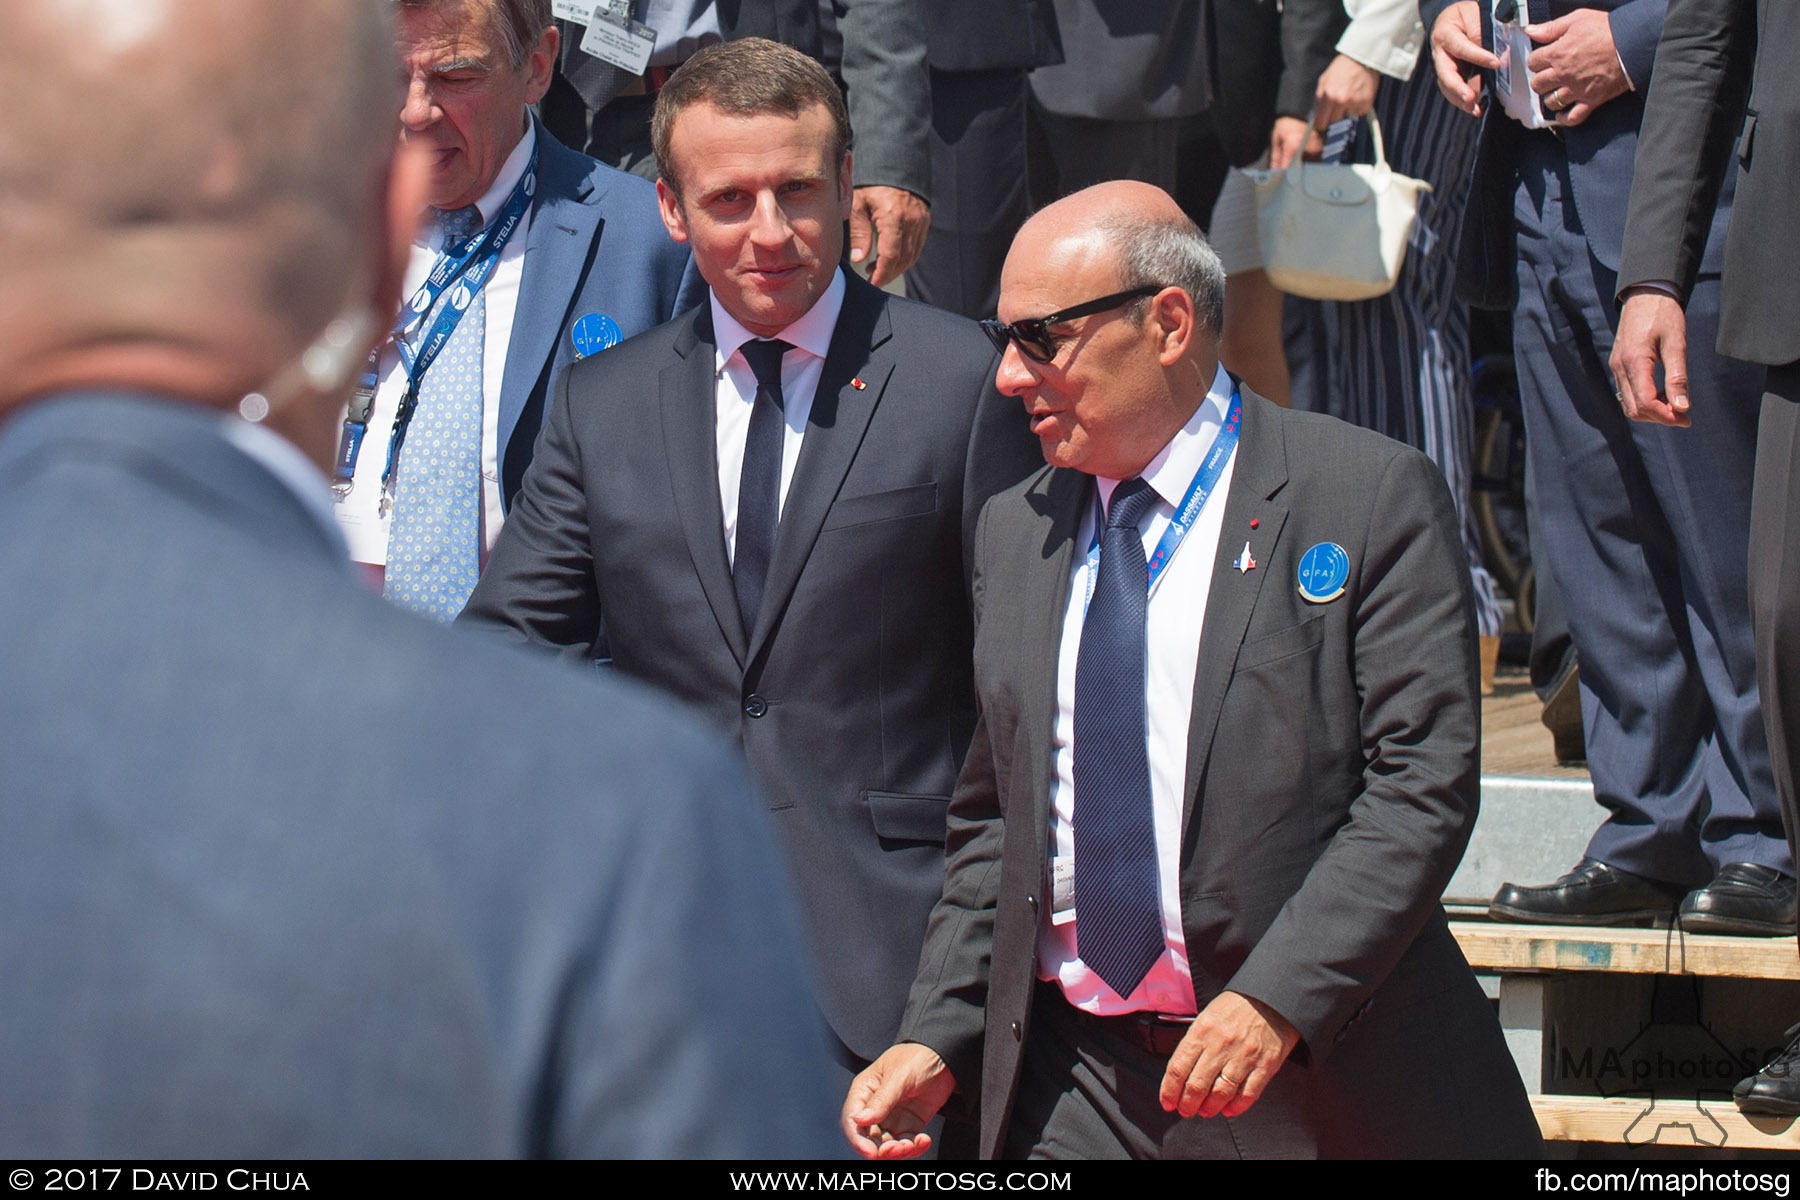 6. French President Emmanuel Macron walks with Dassault Aviation CEO Eric Trappier after watching the demonstration flights at the GIFAS Chalet. Macron landed at Le  Bourget in an Airbus A400M military transport plane to launch the Paris Air Show.